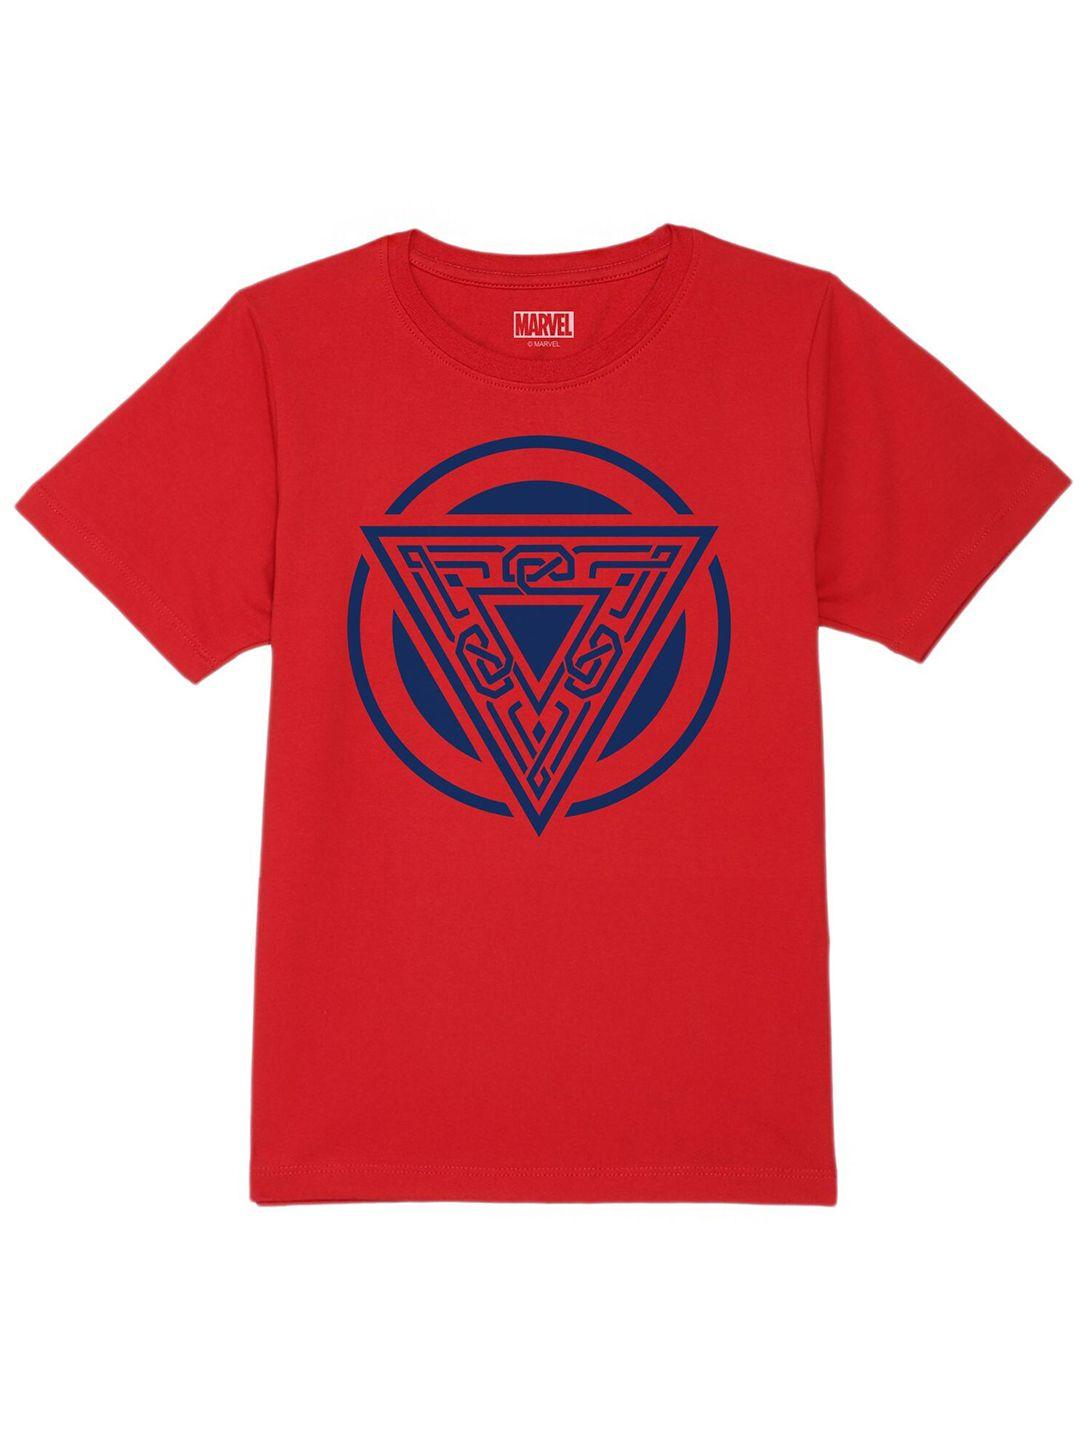 marvel by wear your mind boys red t-shirt